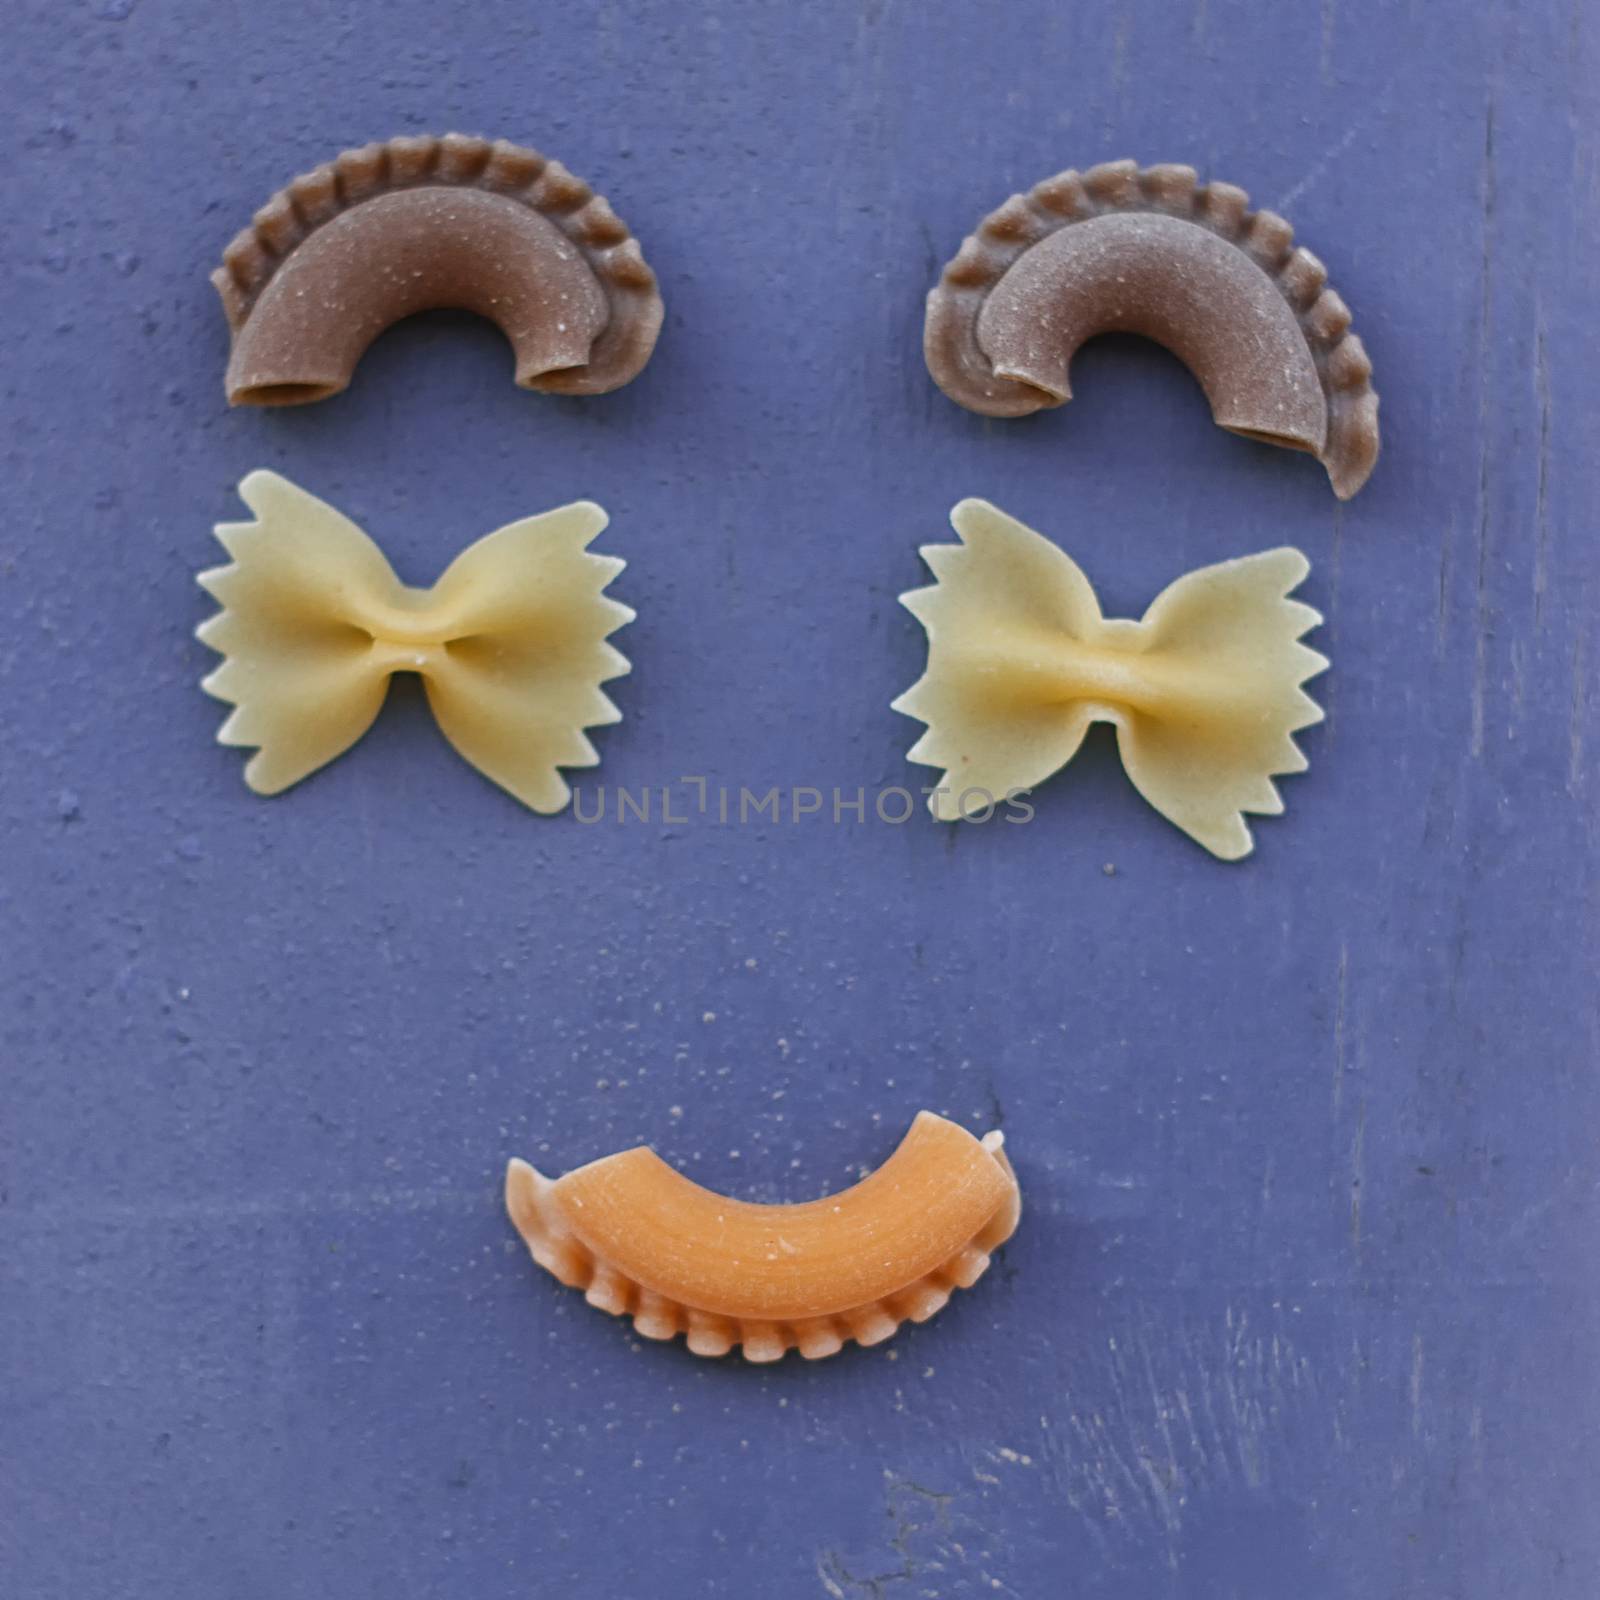 smiley face with raw pasta on blue background